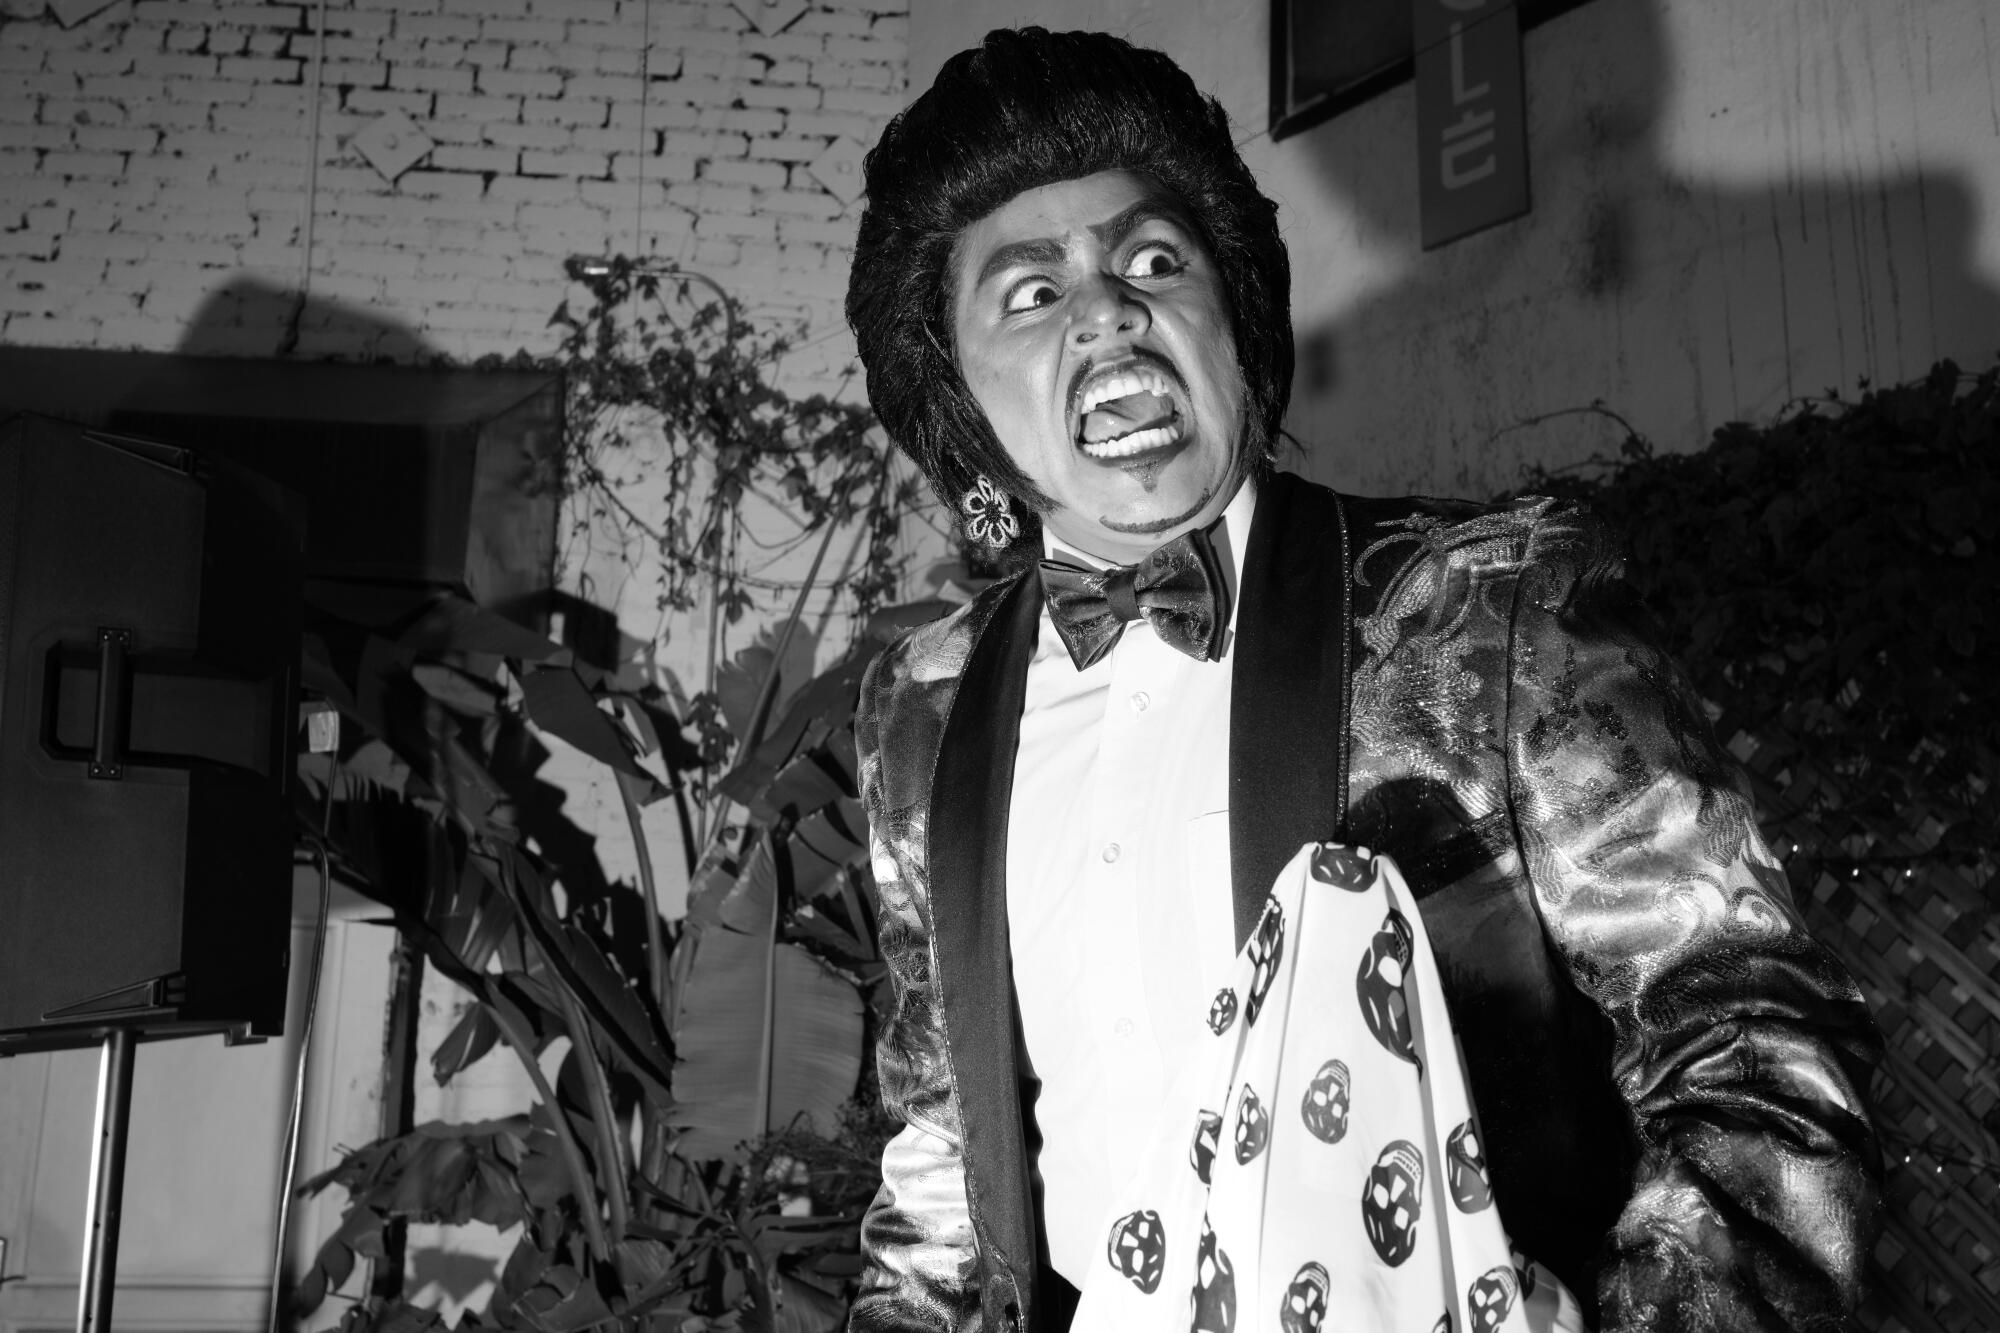 A black-and-white photo of a person in a tux who appears to be angry and screaming.